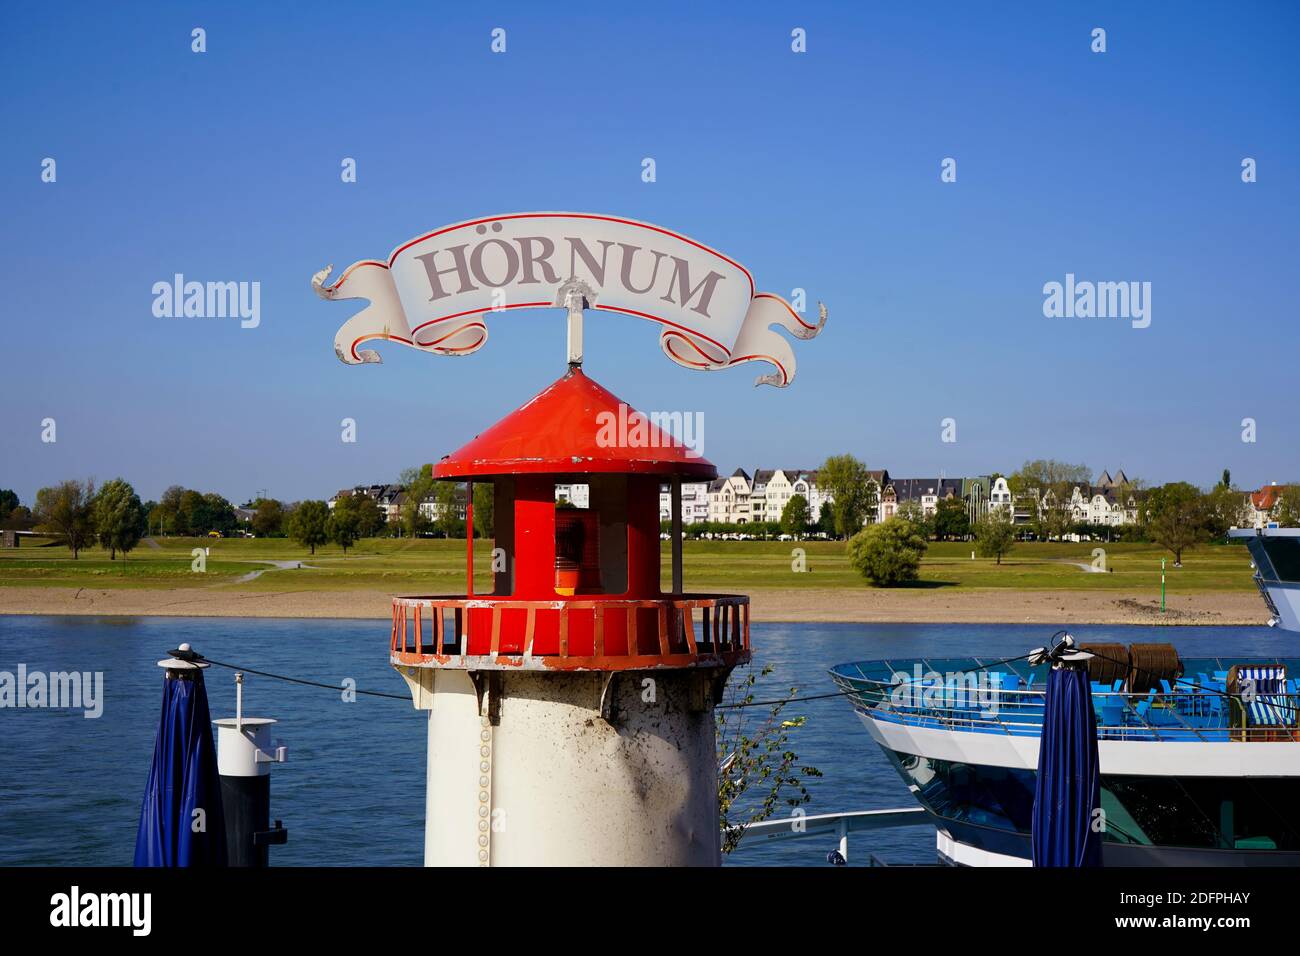 Decorational lighthouse in front of a fish restaurant at the Rhine river promenade on a beautiful sunny day. Stock Photo